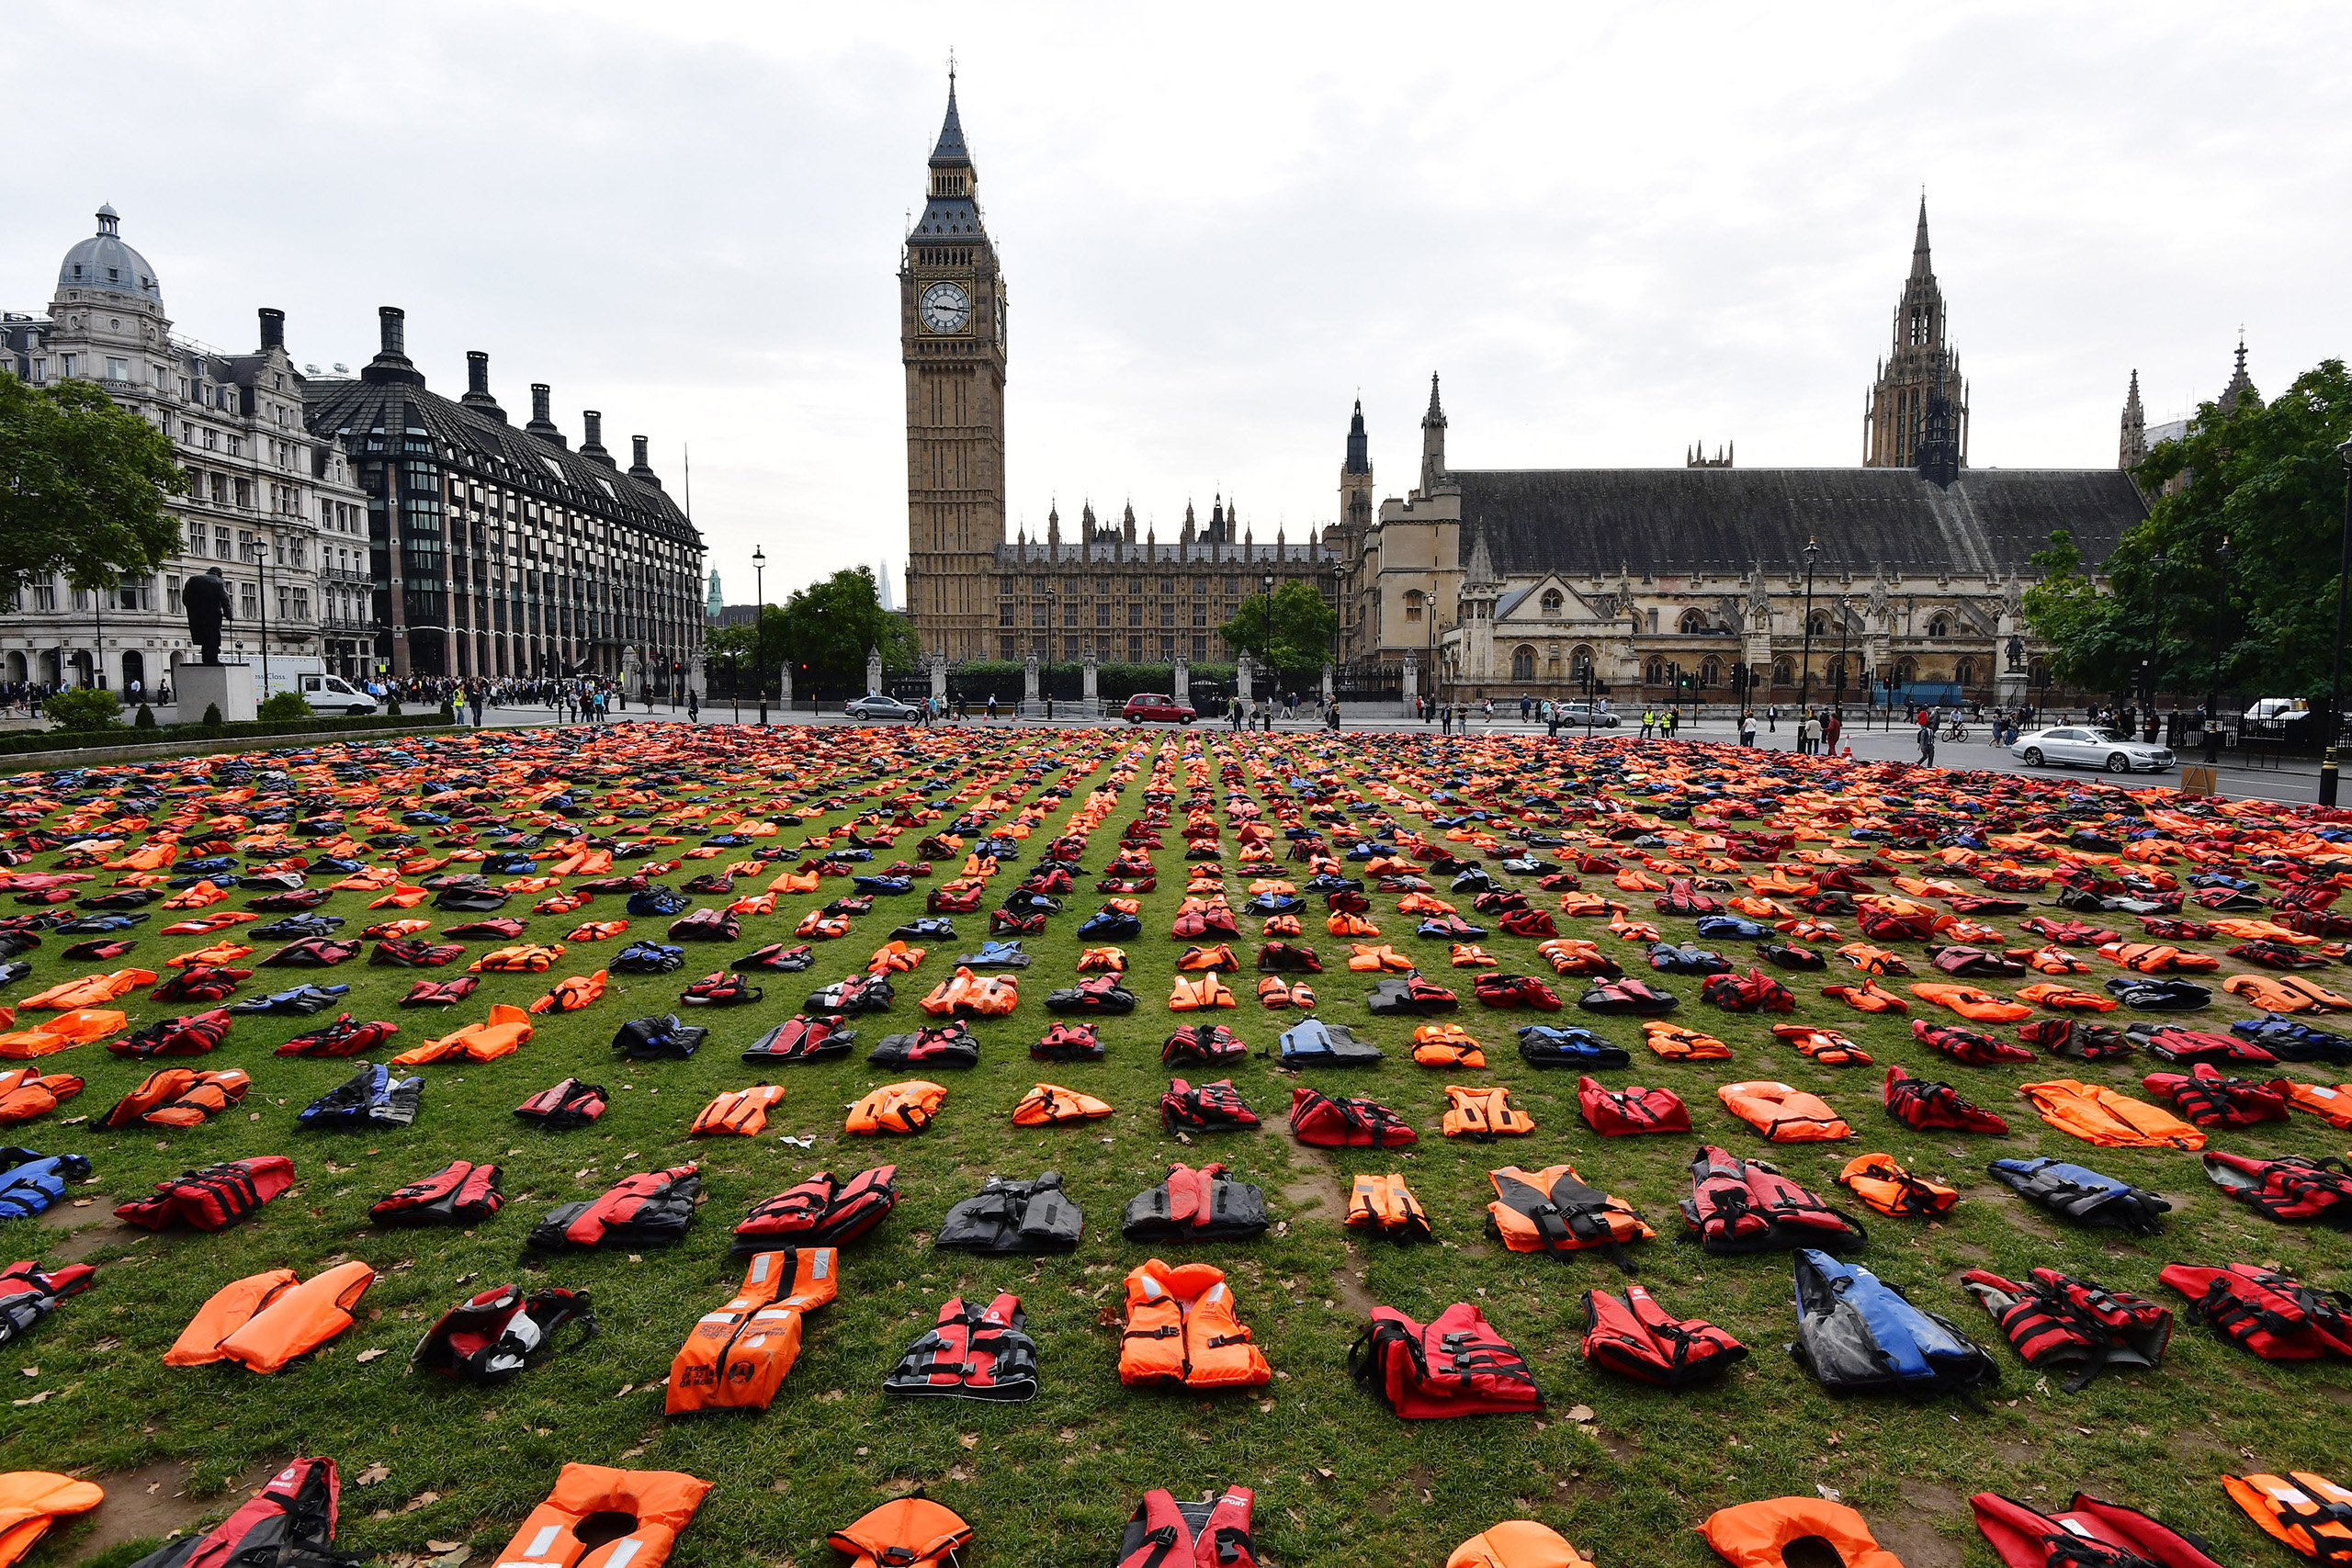 Protestors Create A "Graveyard Of Lifejackets" To Coincide With The UN Migration Summit